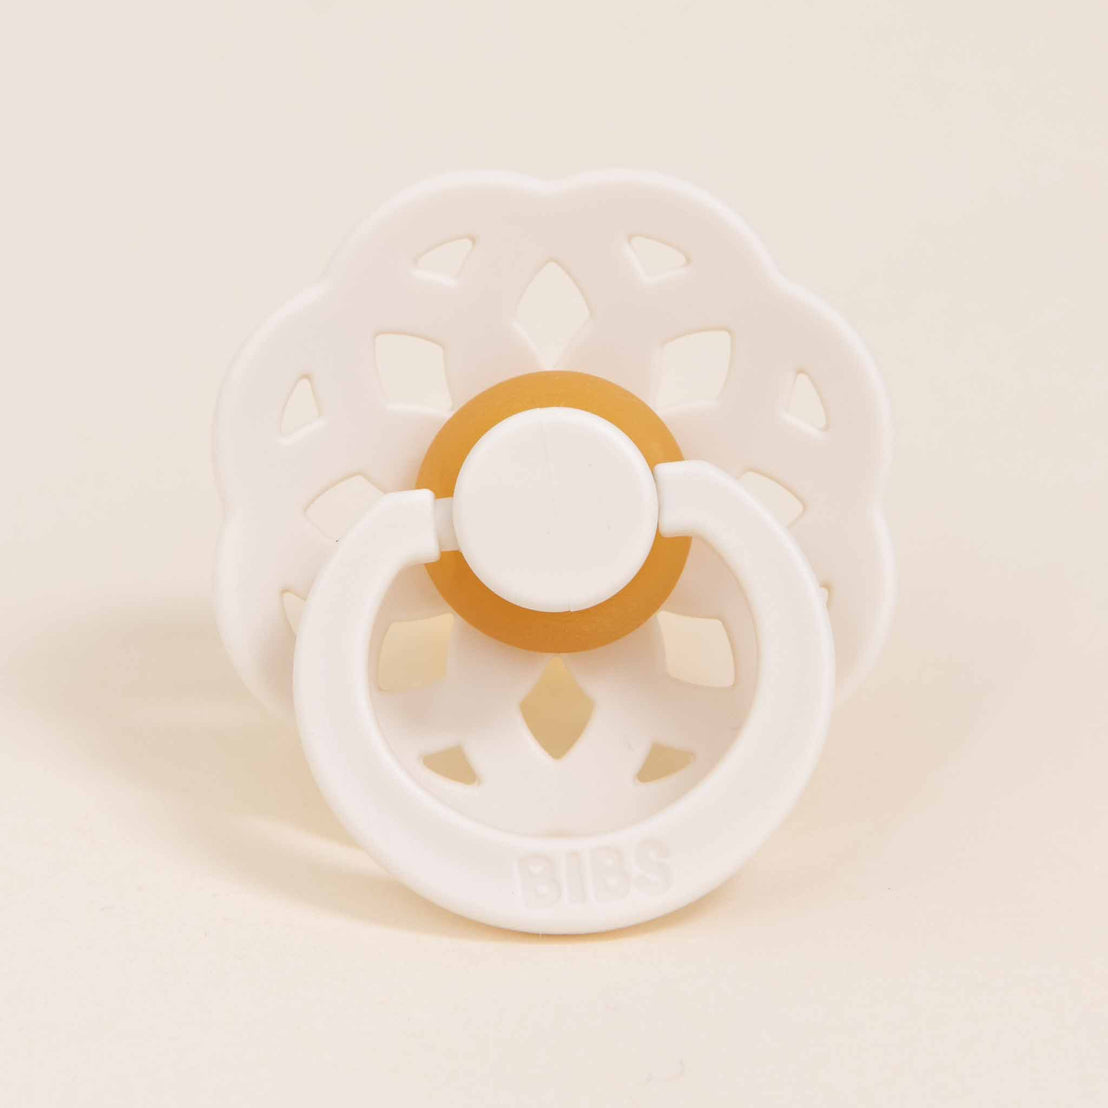 A Kristina Pacifier in Ivory with a flower-shaped shield and a ring handle, perfect for christening, displayed against a pale background.